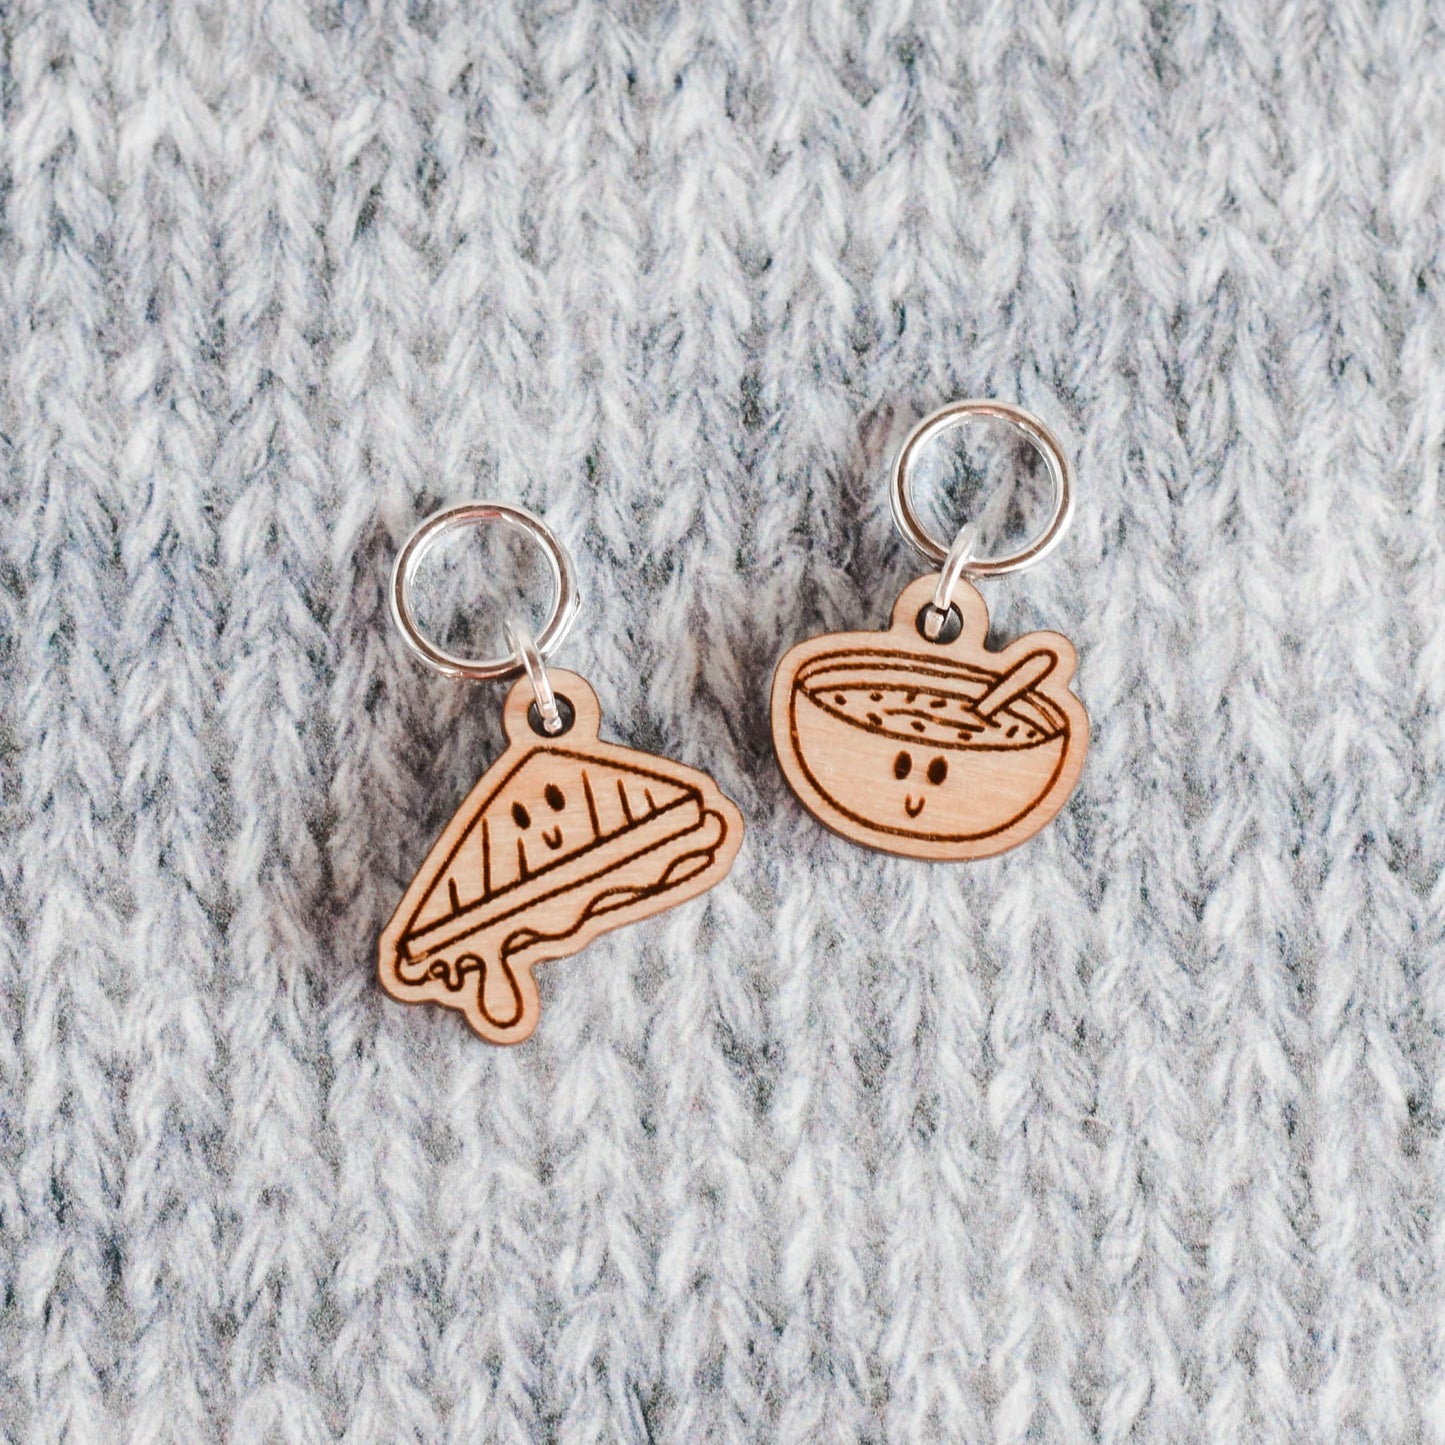 Set of 2 Stitch Markers, Kawaii Grilled Cheese and Soup, Laser Engraved Wood Stitch Markers, Food Markers, Foodie Stitch Markers